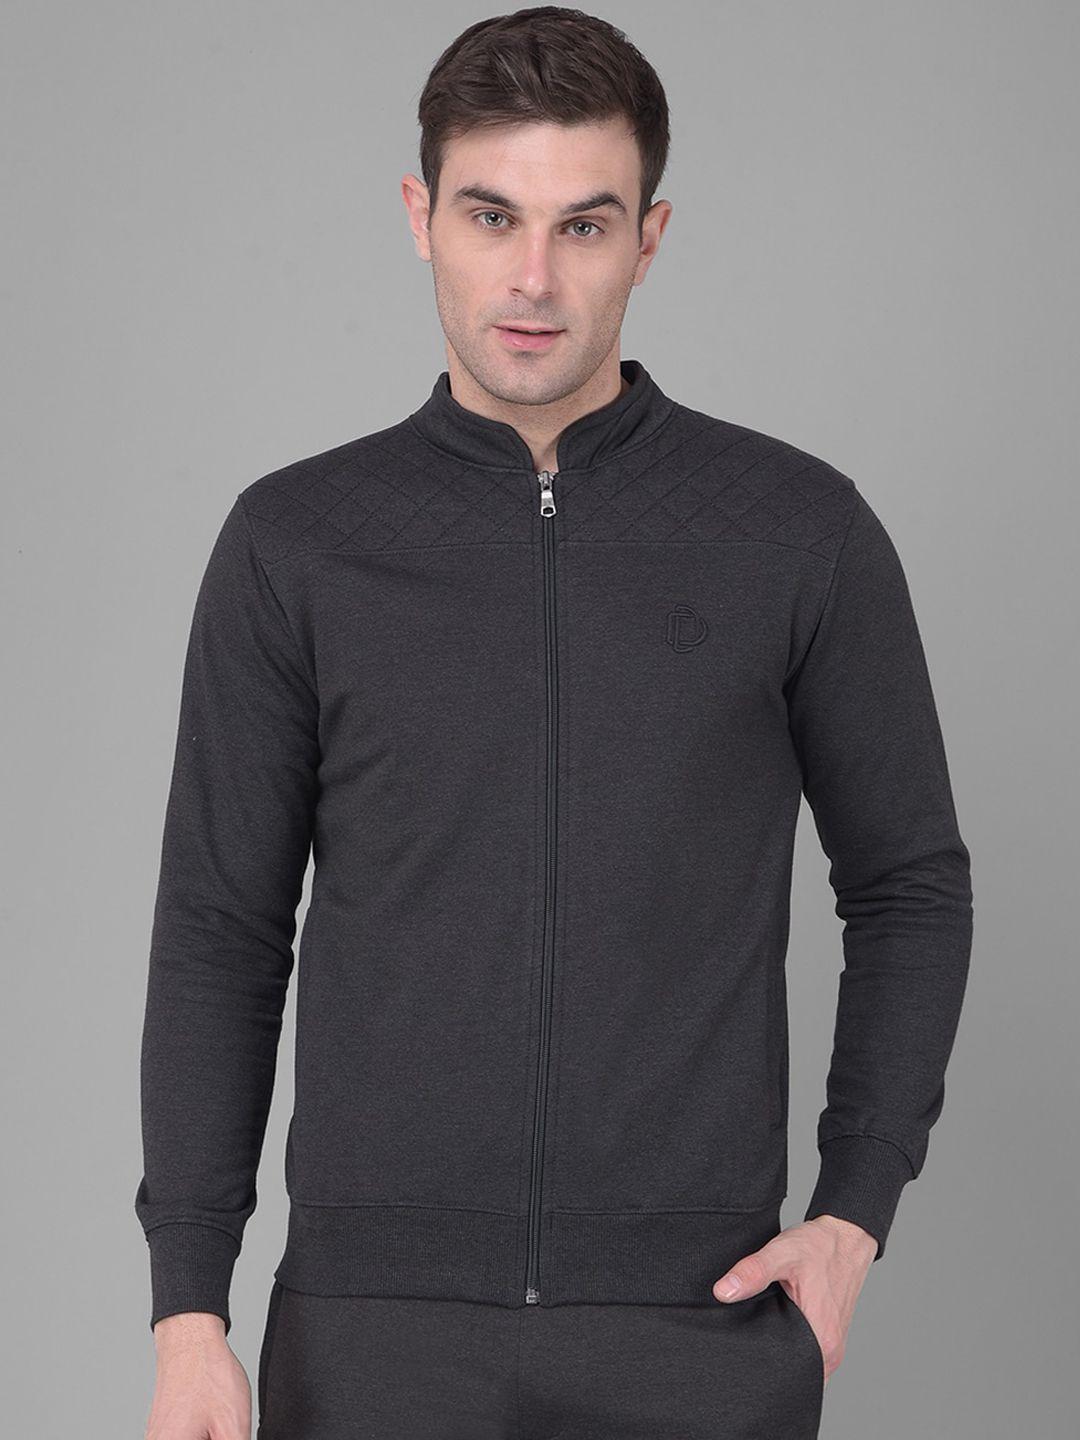 dollar-lightweight-antimicrobial-cotton-sporty-jacket